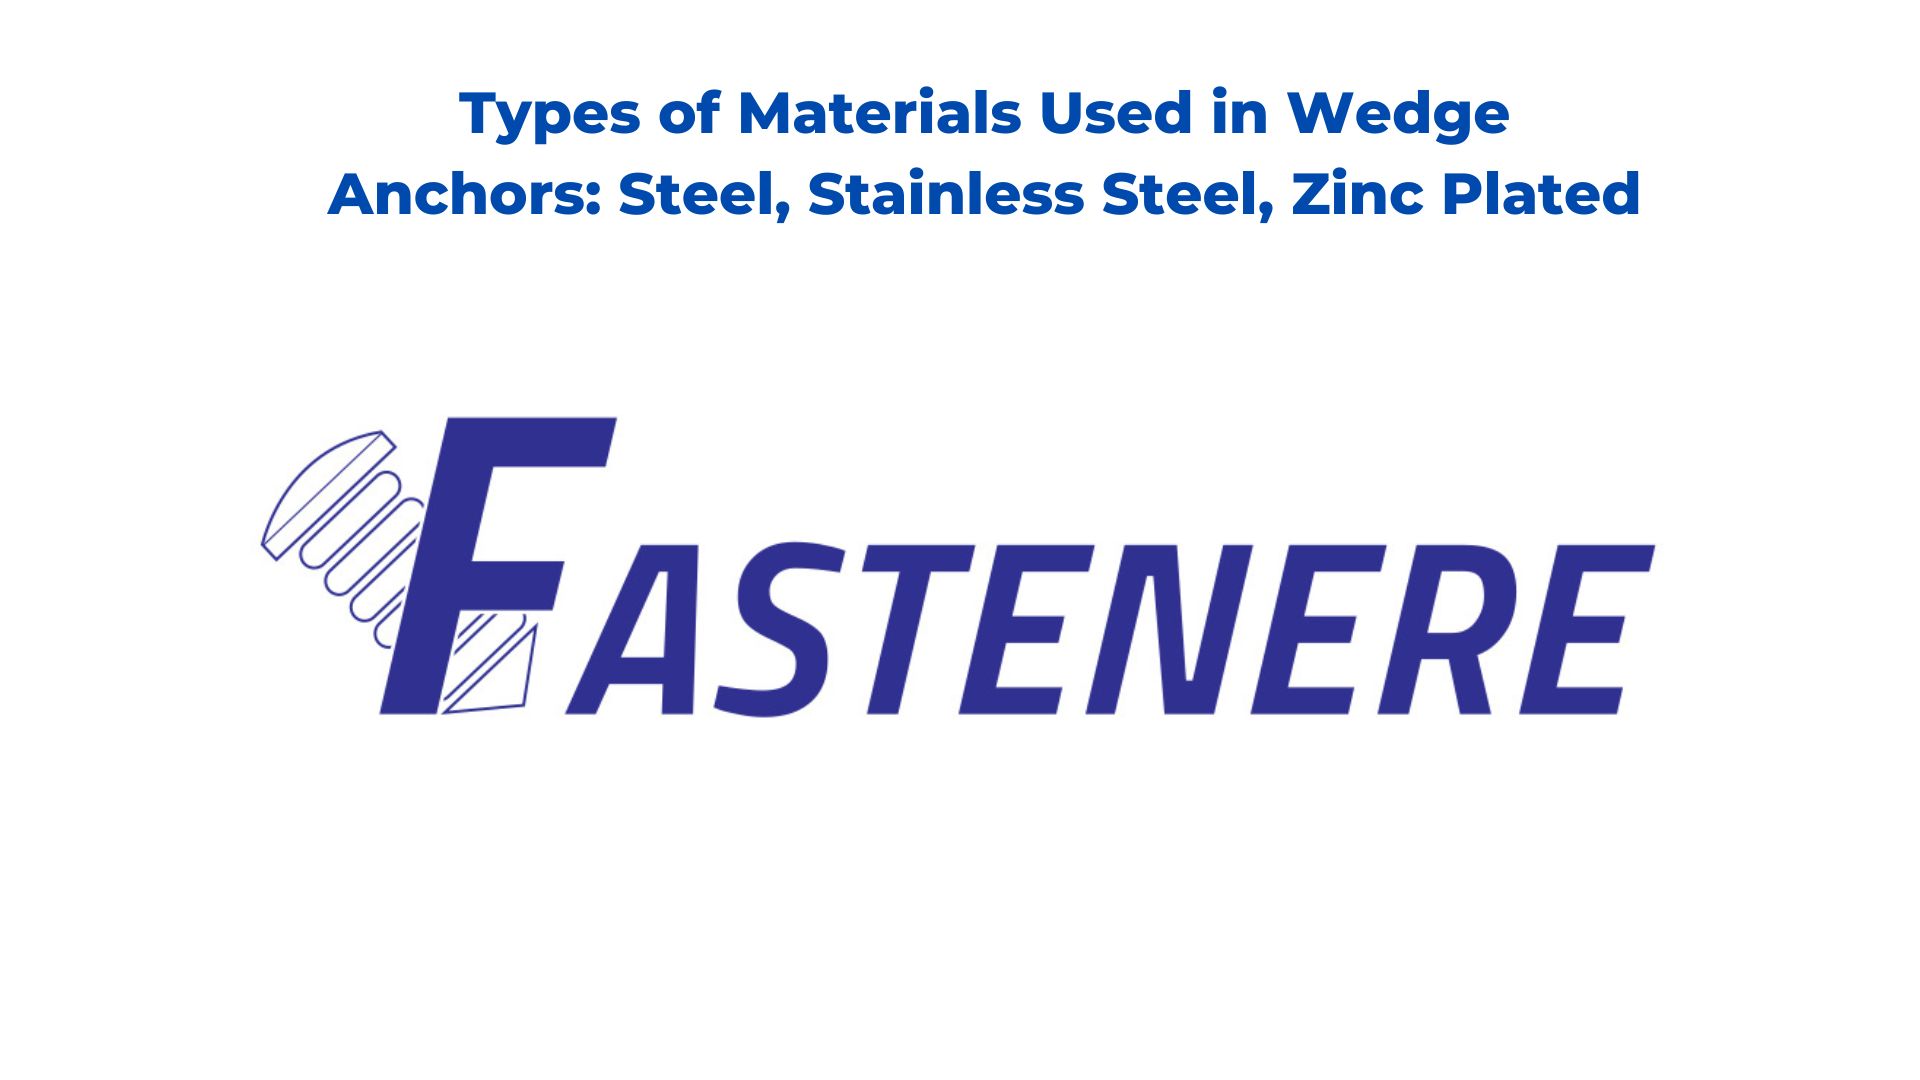 Types of Materials Used in Wedge Anchors: Steel, Stainless Steel, Zinc Plated